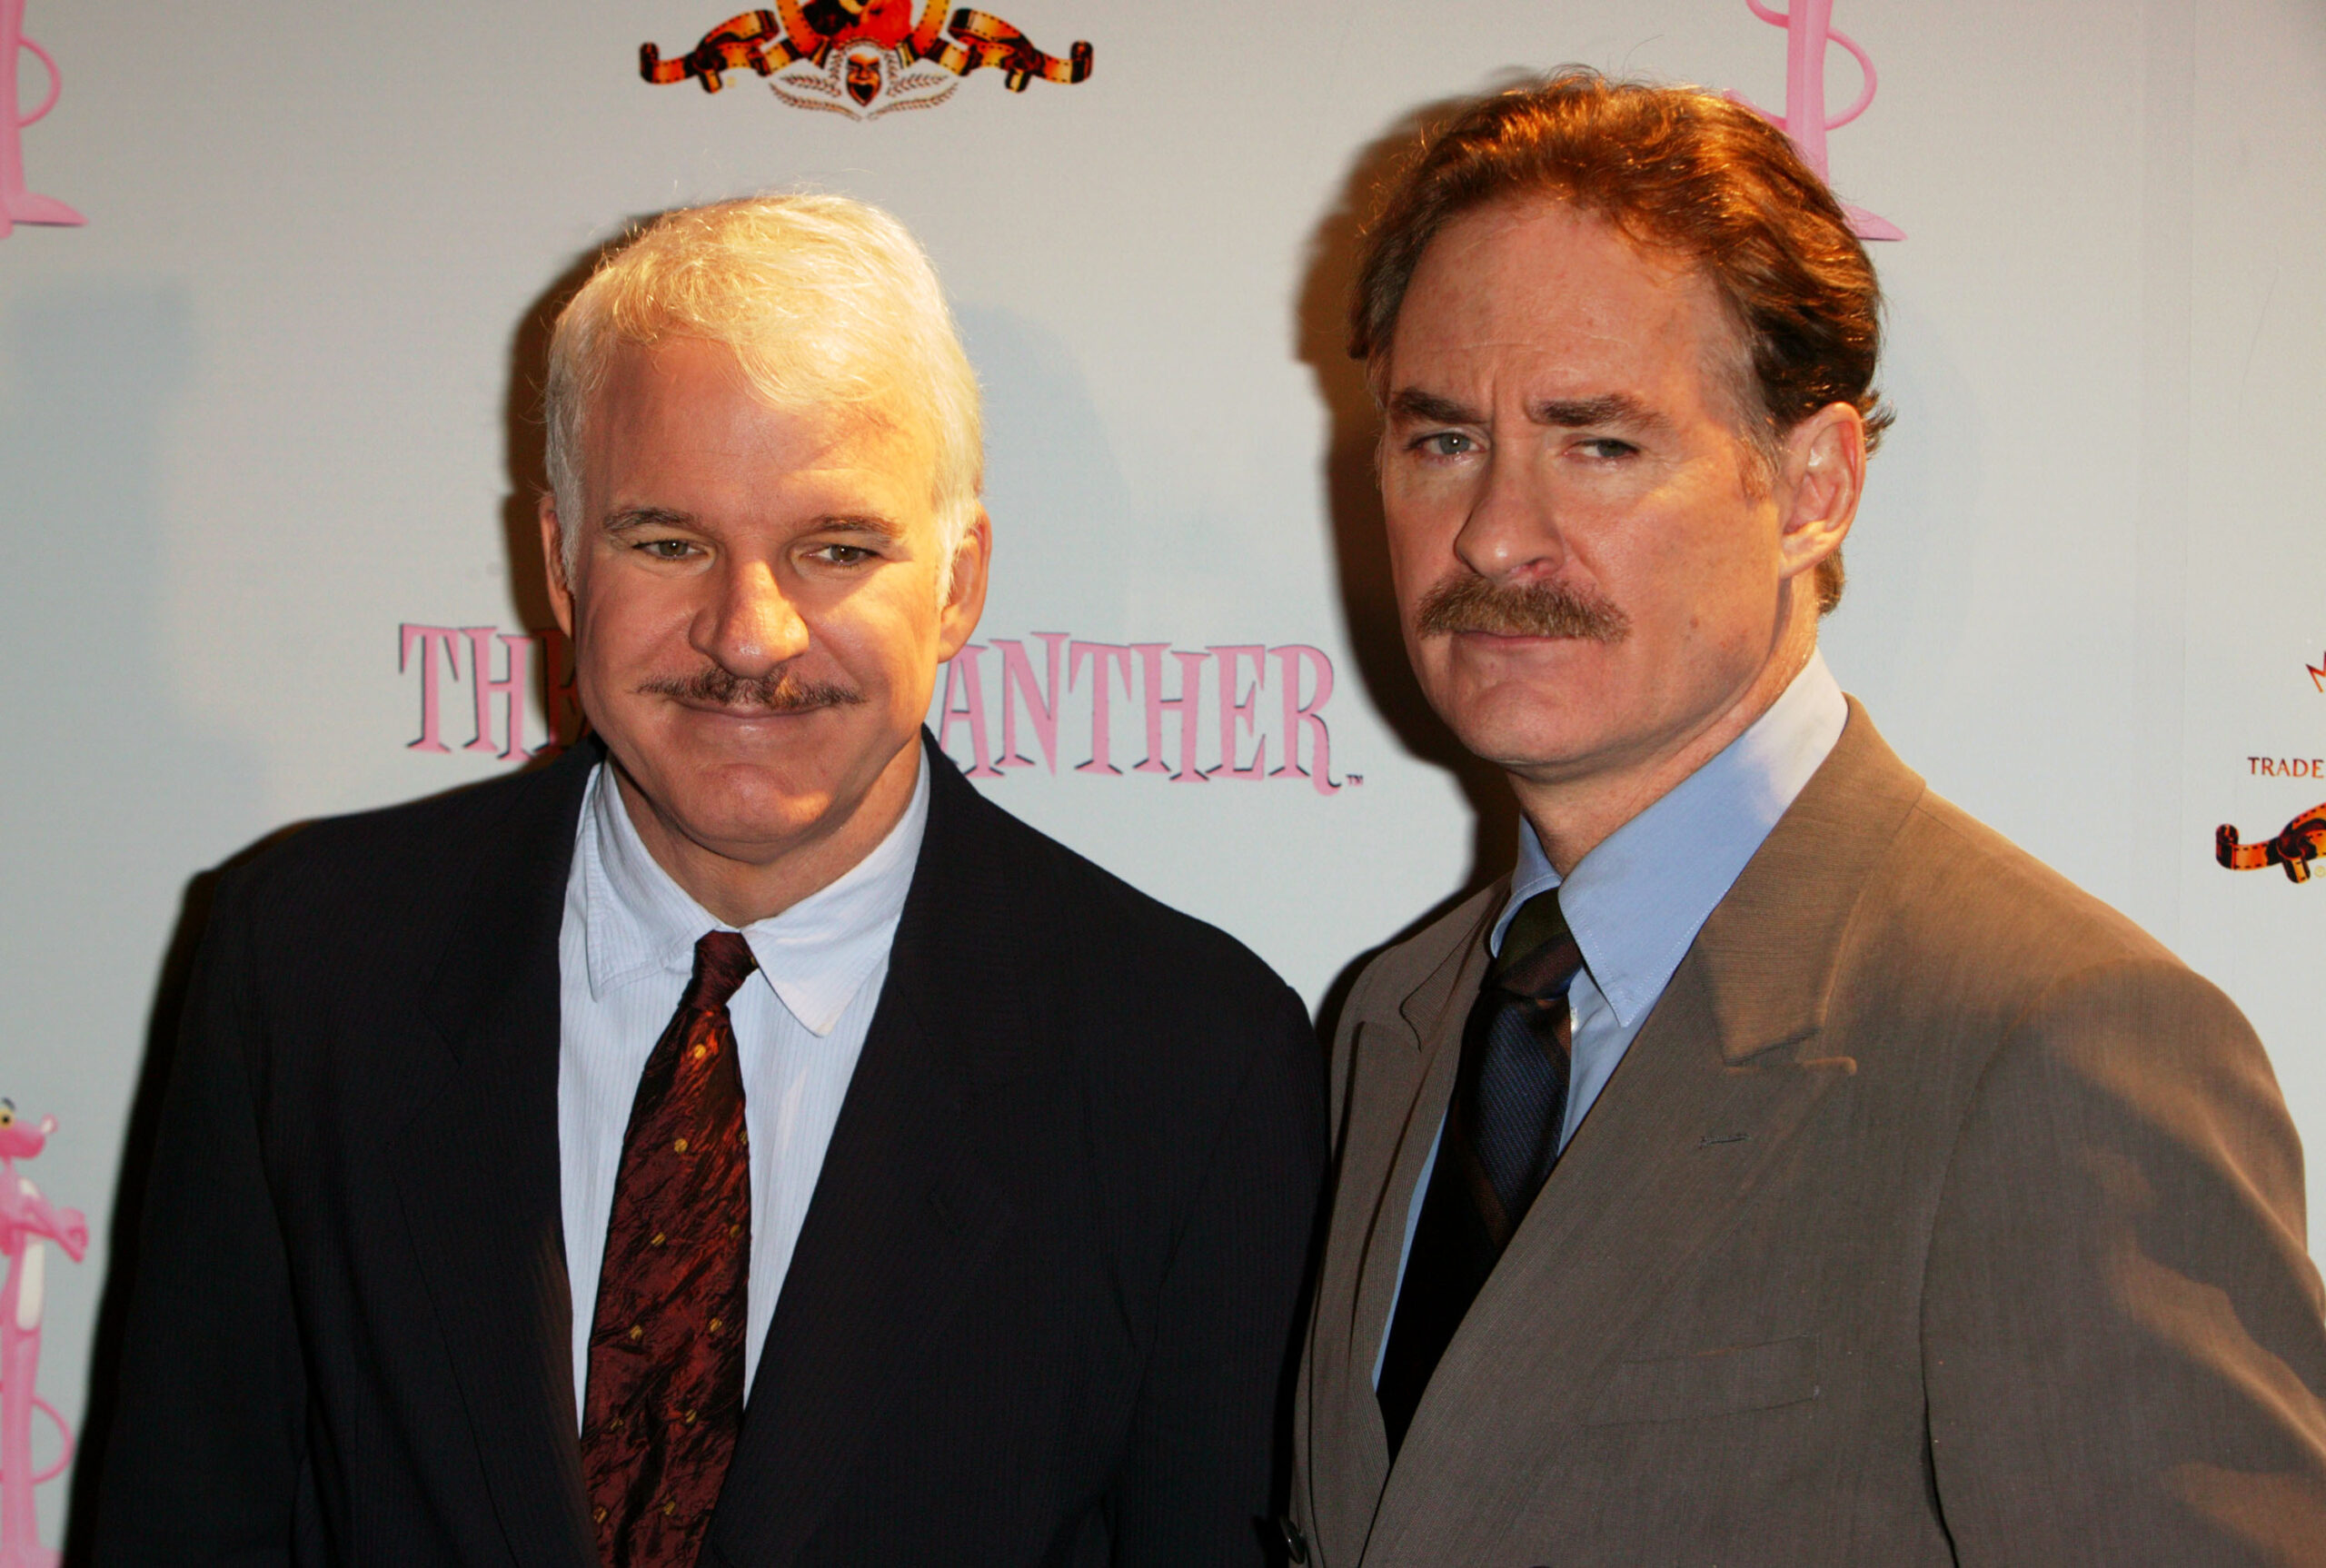 Photo of Comedy Movie Actors Steve Martin and Kevin Kline - Pop Culture Allusions